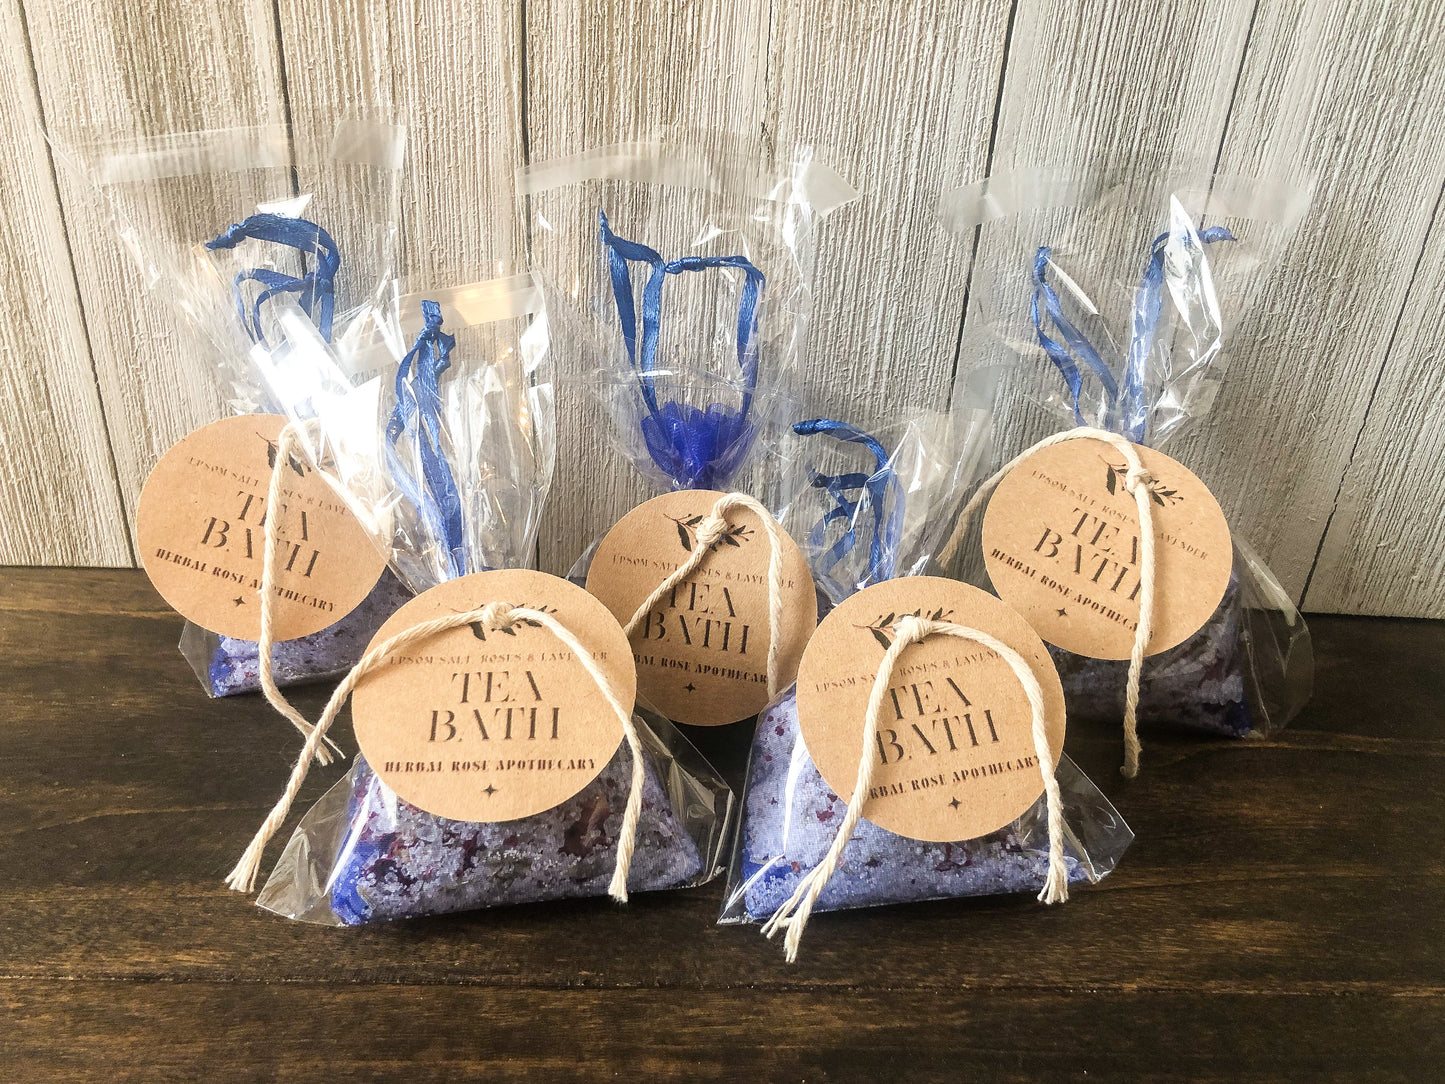 bulk herbal tea bath party favor/appreciation gifts on wooden table with white wooden background